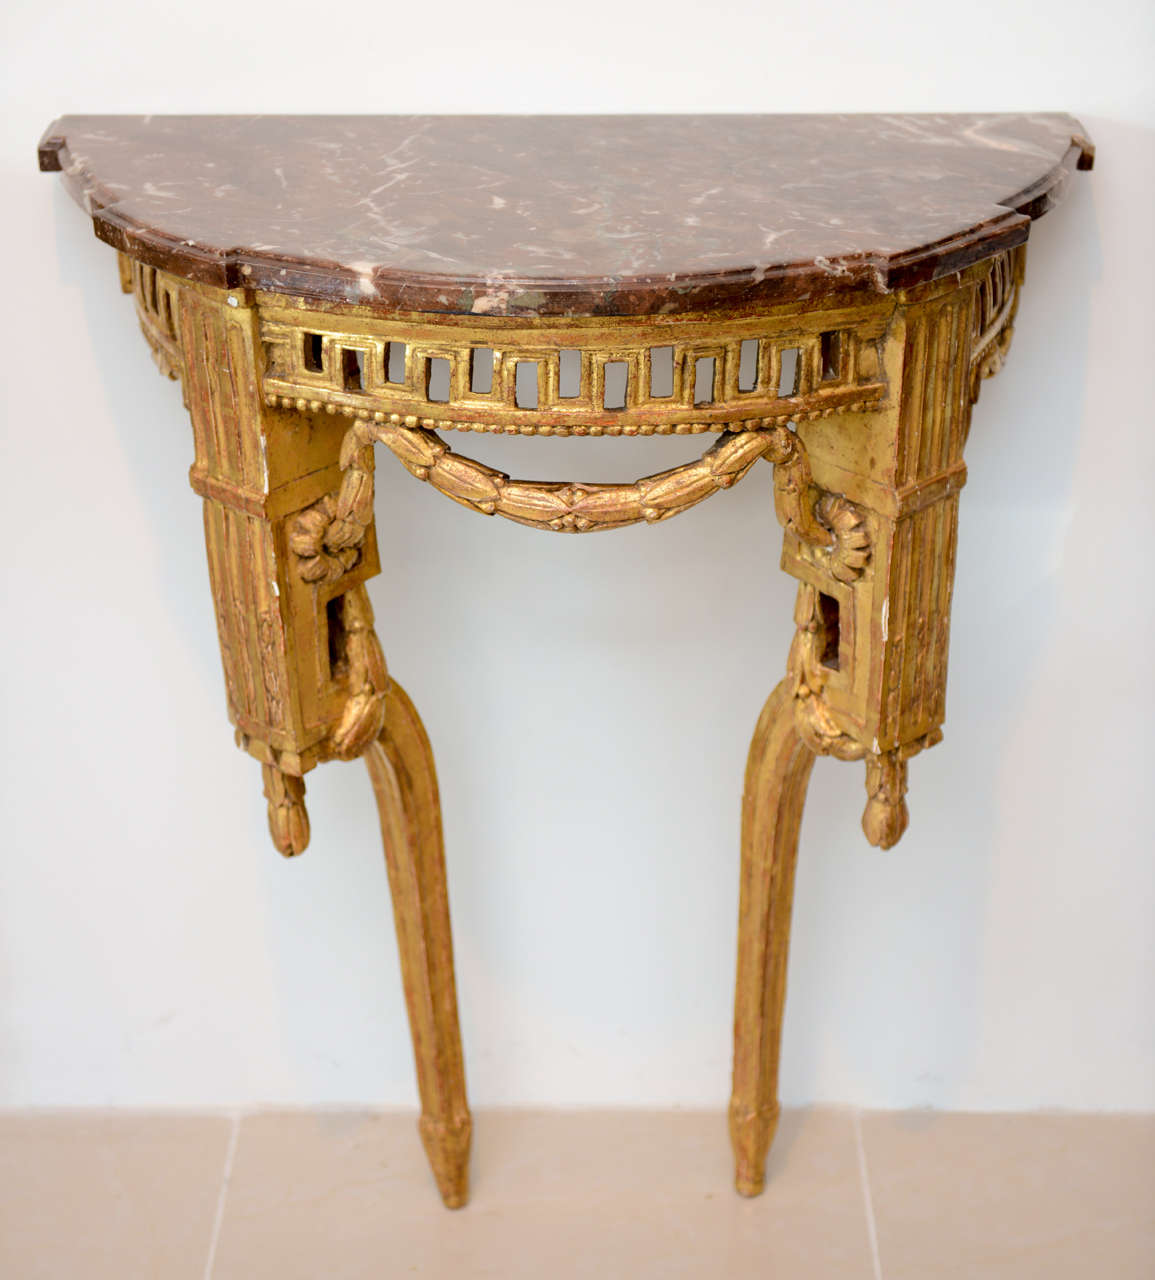 The rosso marble top above a pierced frieze with modified key motif, with carved swags and fluted elements on splayed legs.